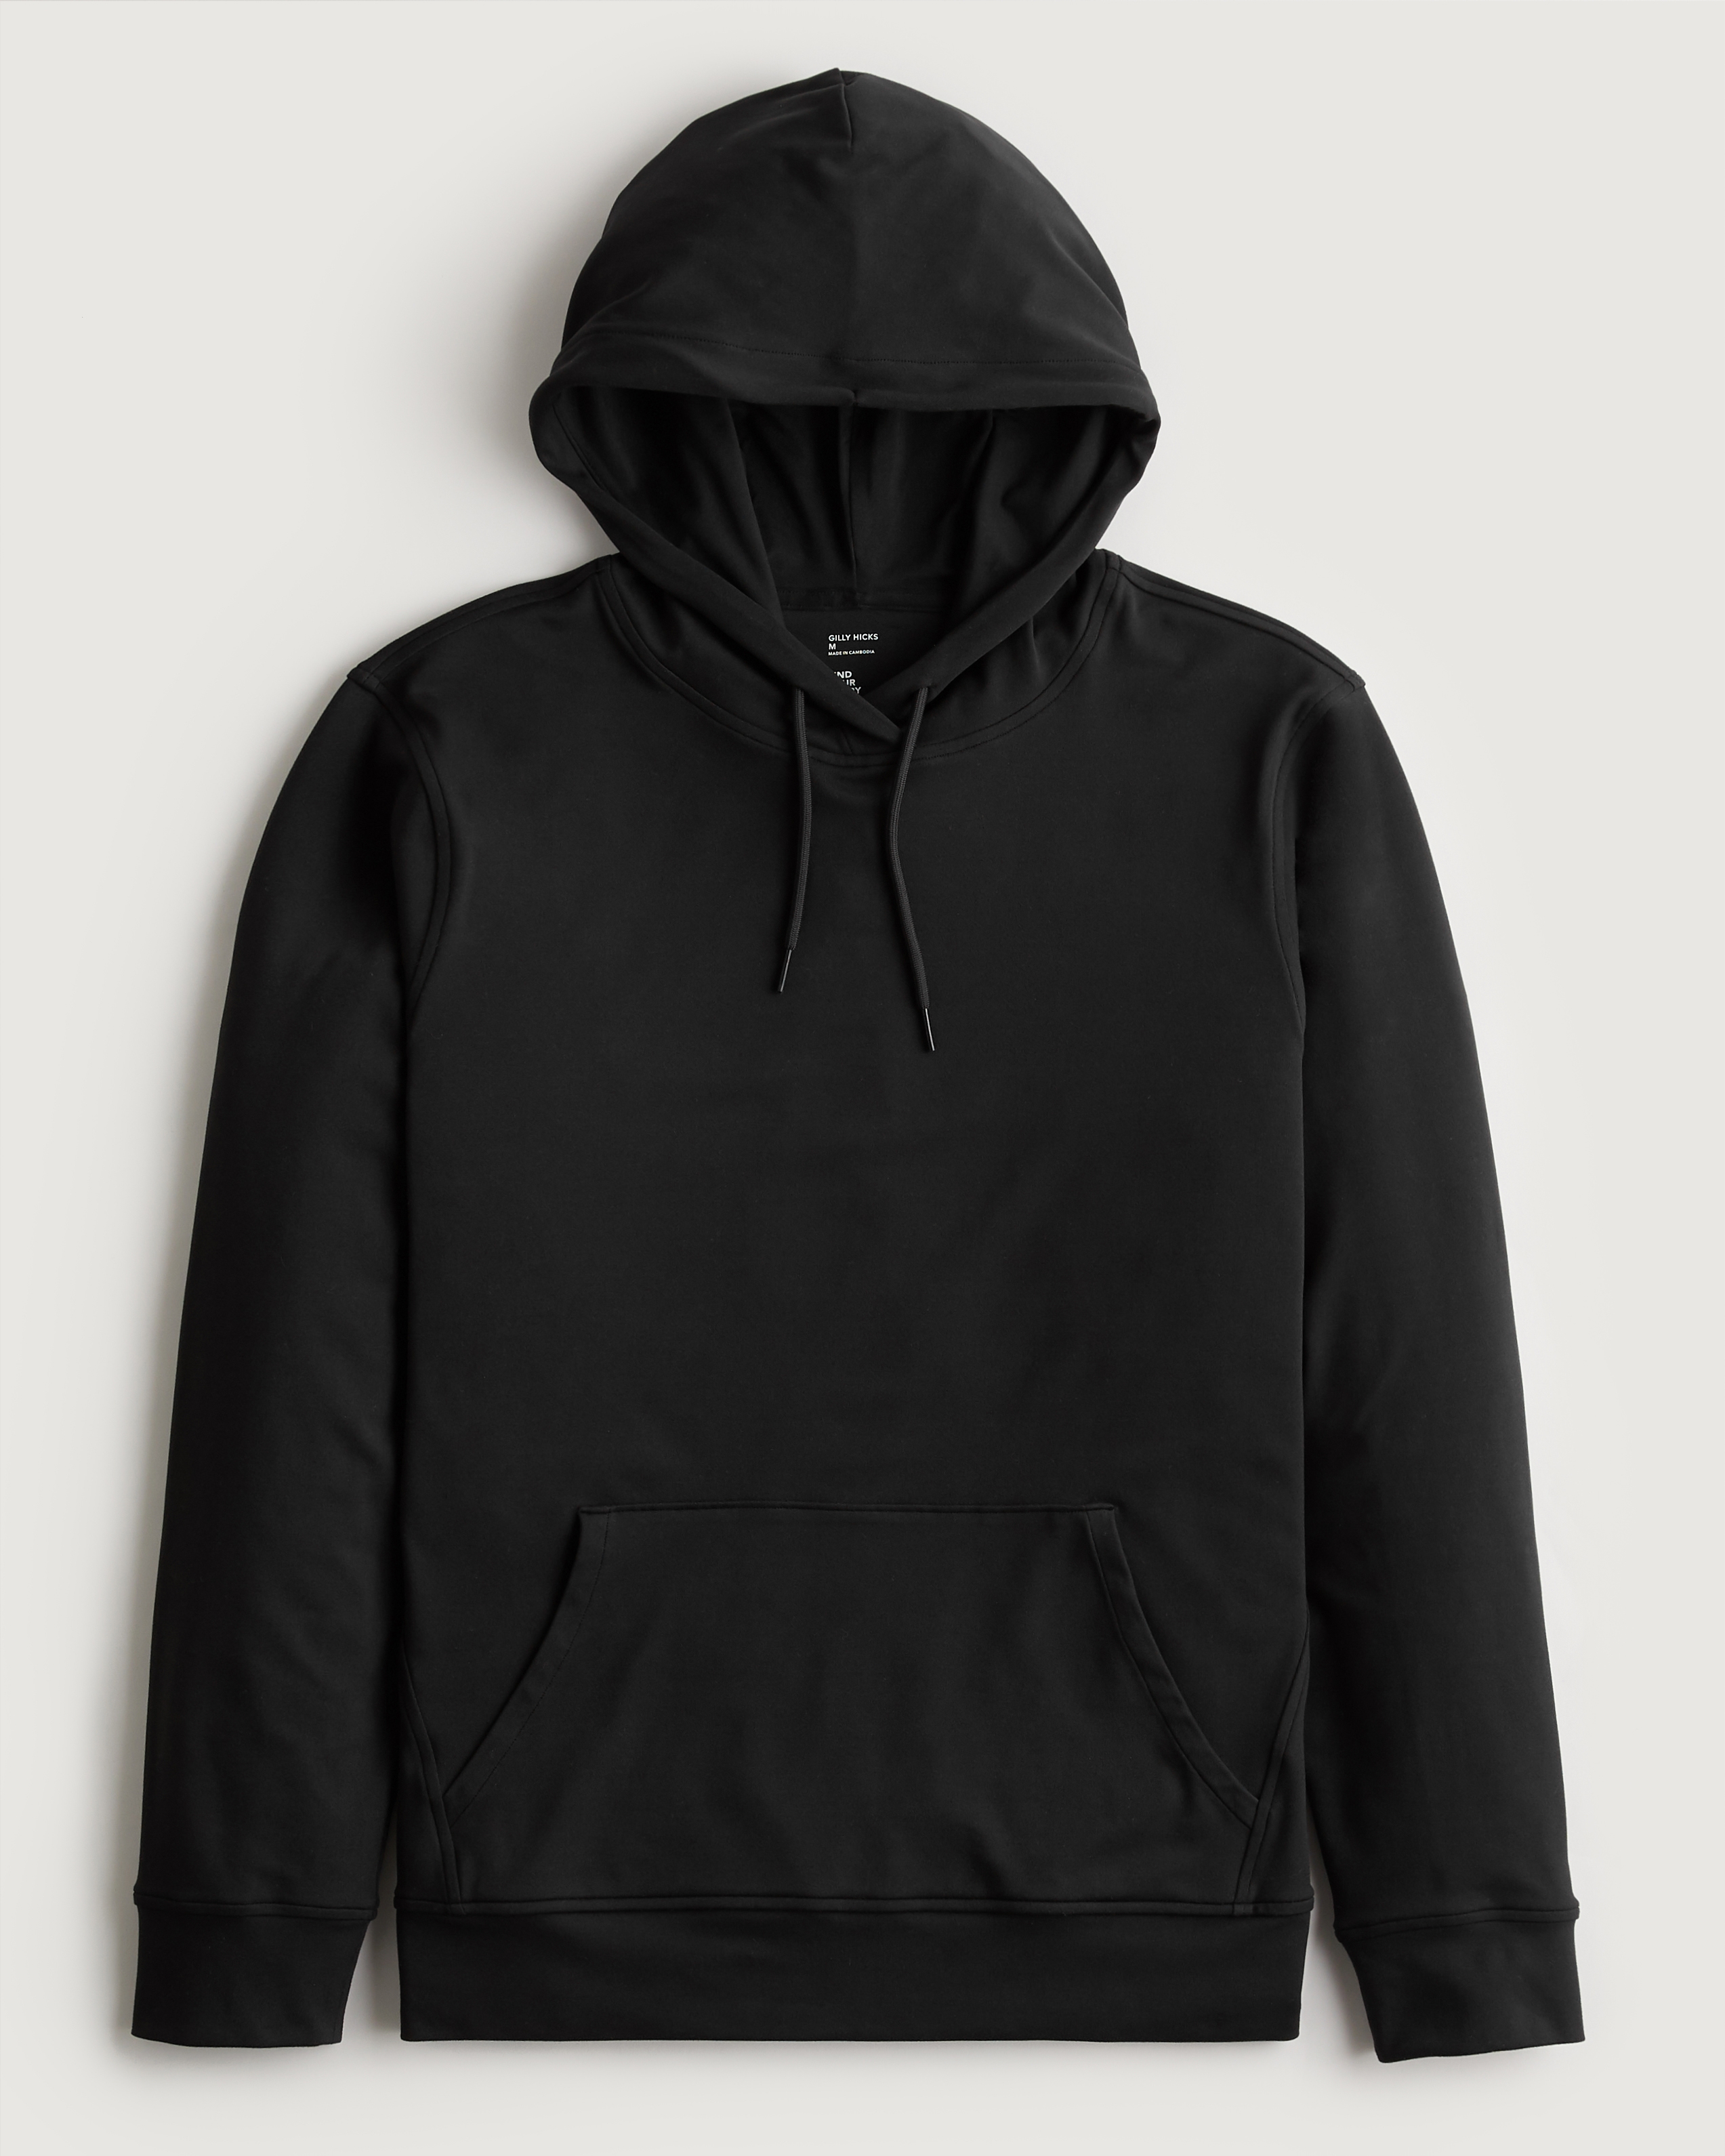 Gilly Hicks Active Recharge Hoodie